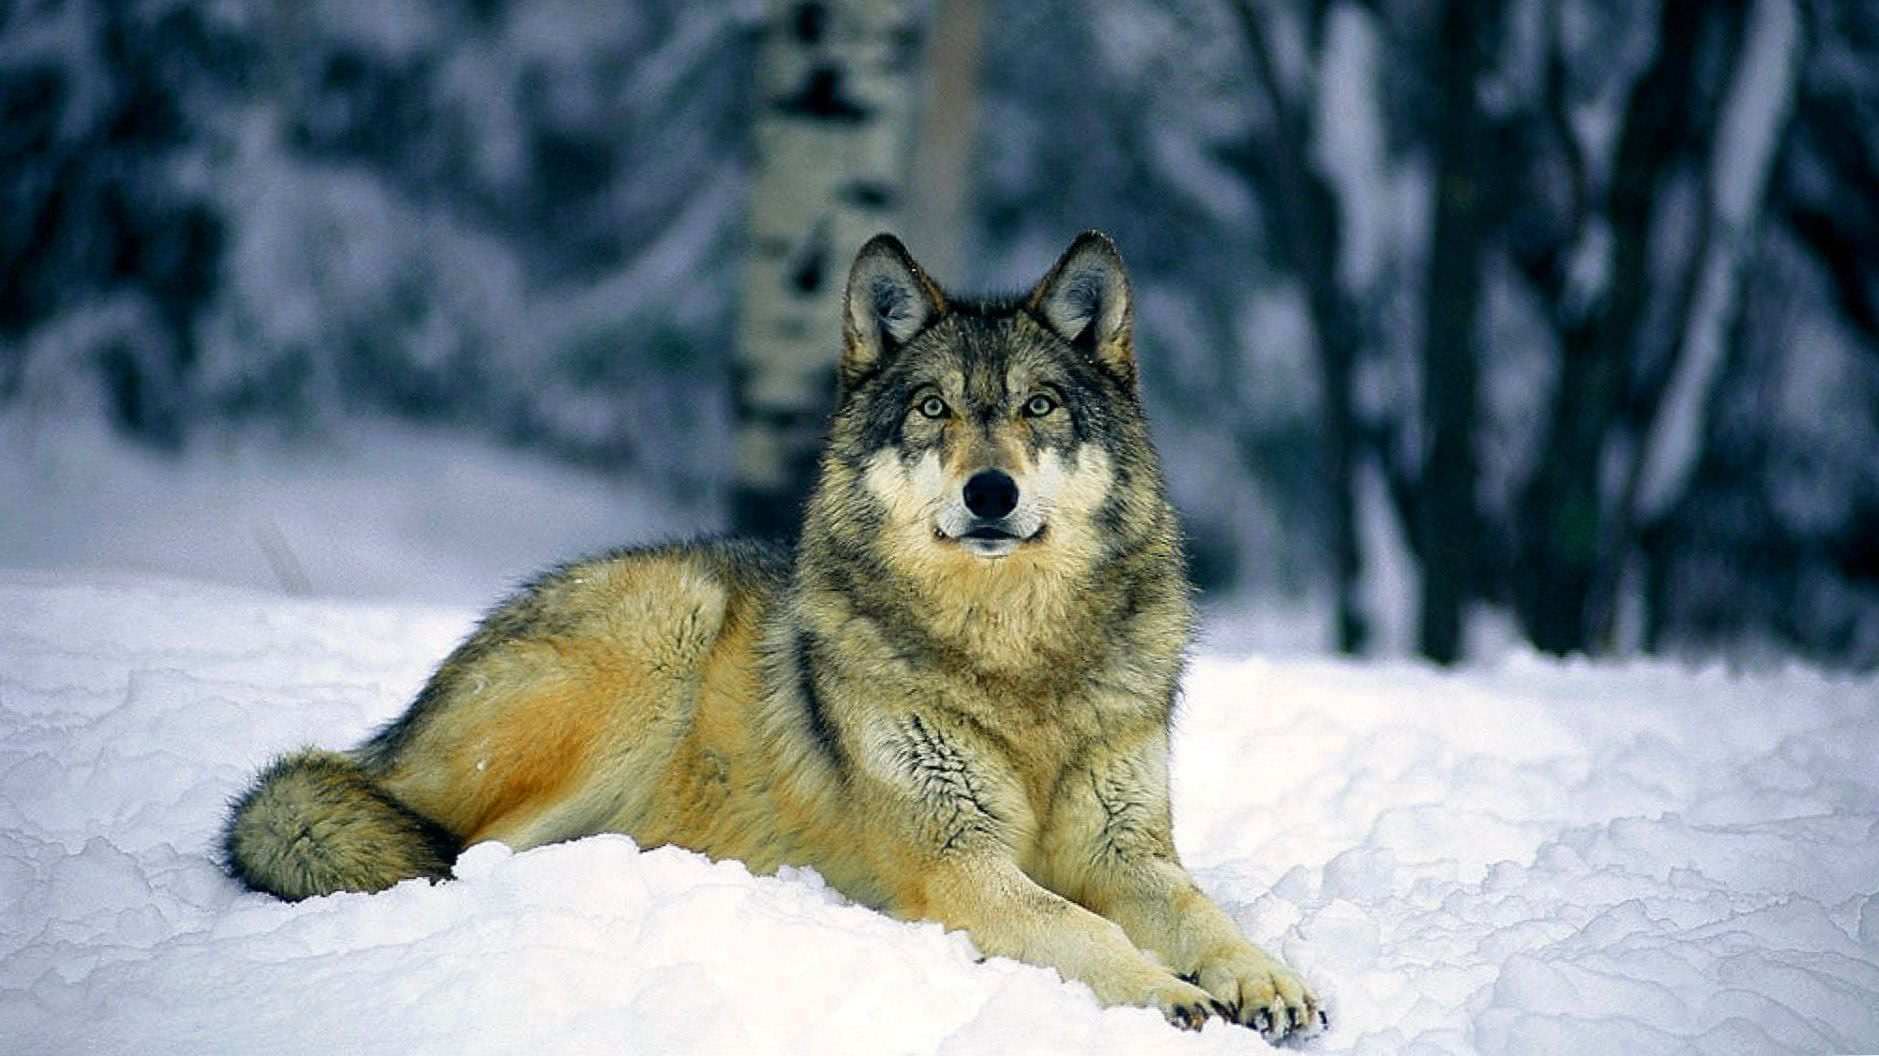 HD Wallpapers 1080p Of Wolf